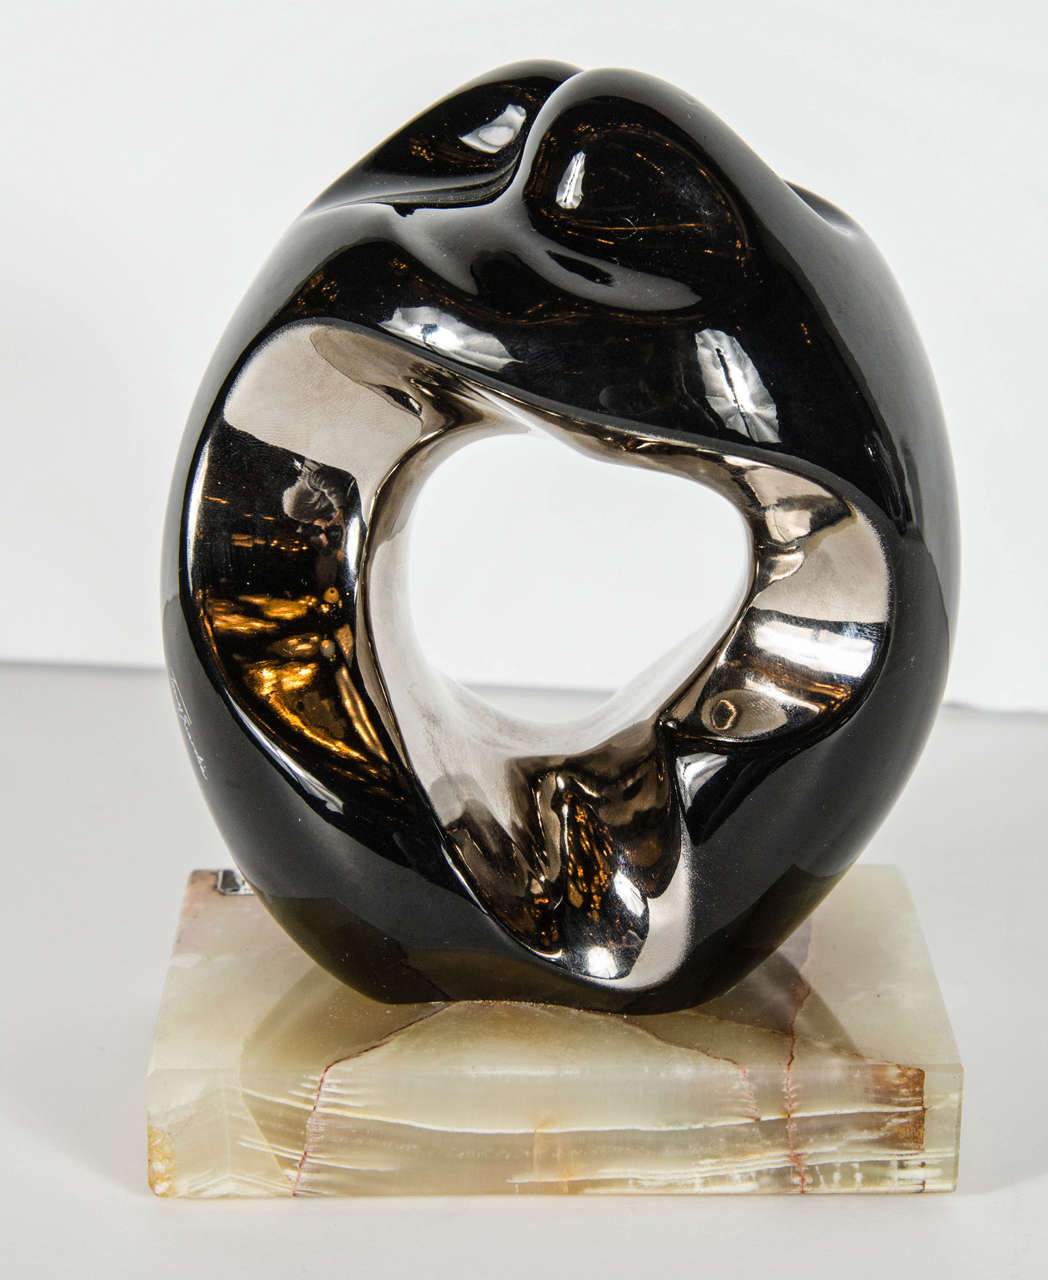 Mid-Century Modernist bronze ceramic sculpture by Torres Gaurdia.  This sculpture by the famous artist Torres Guardia, from Spain, features a couple embracing and cast in bronzed ceramic then set atop an exotic Onyx base.  The interior of the